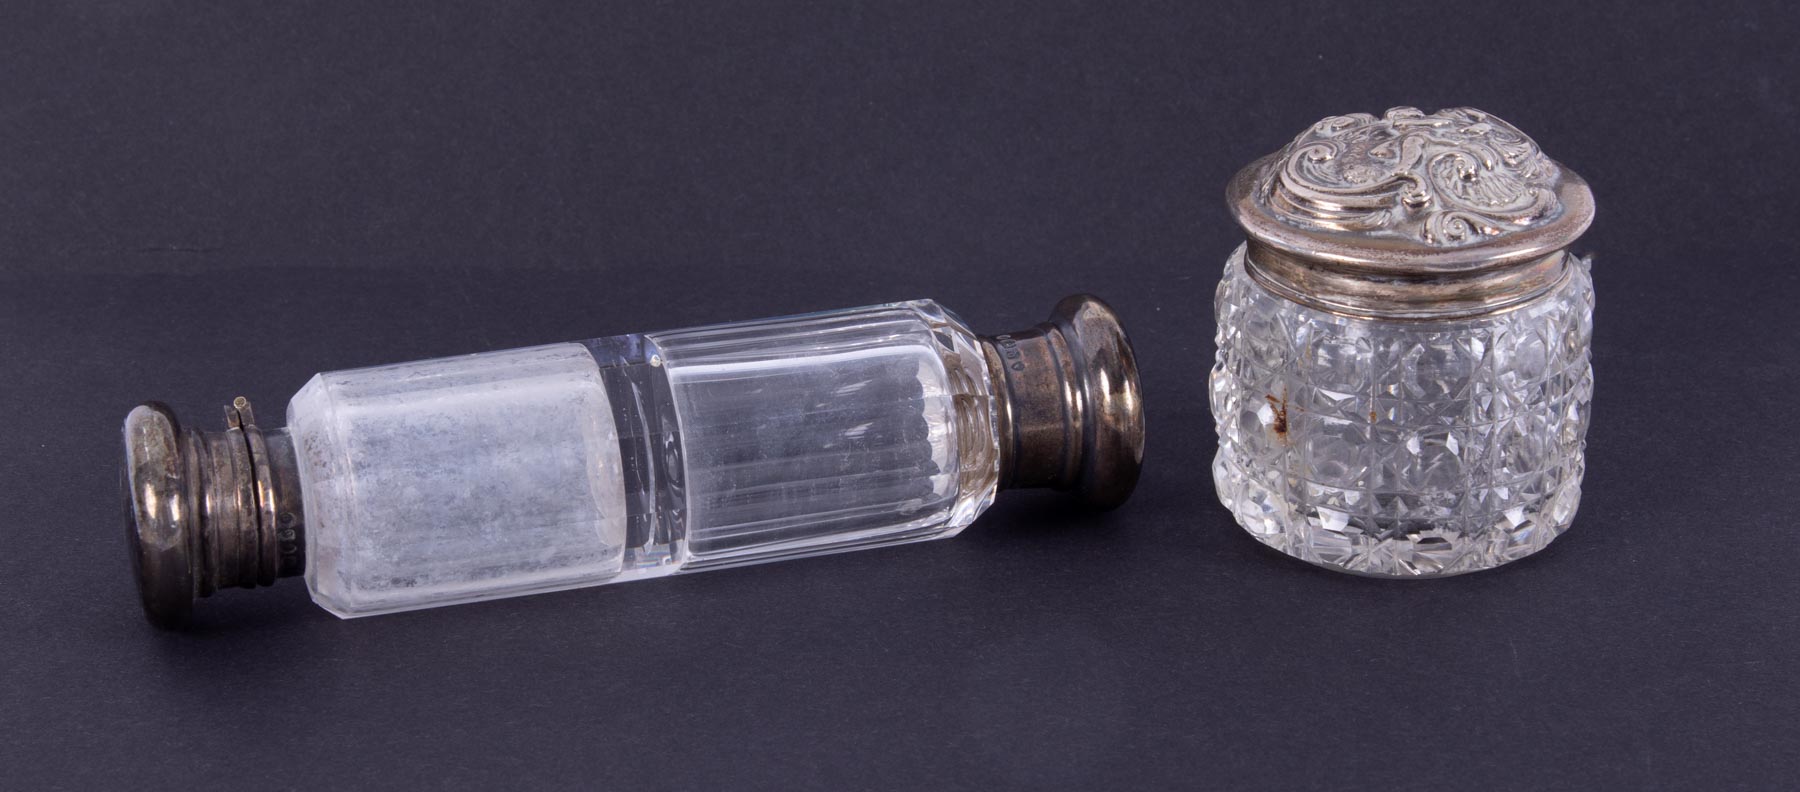 A Victorian silver double end scent bottle, London hallmark,c1859-60, makers mark HF together with a